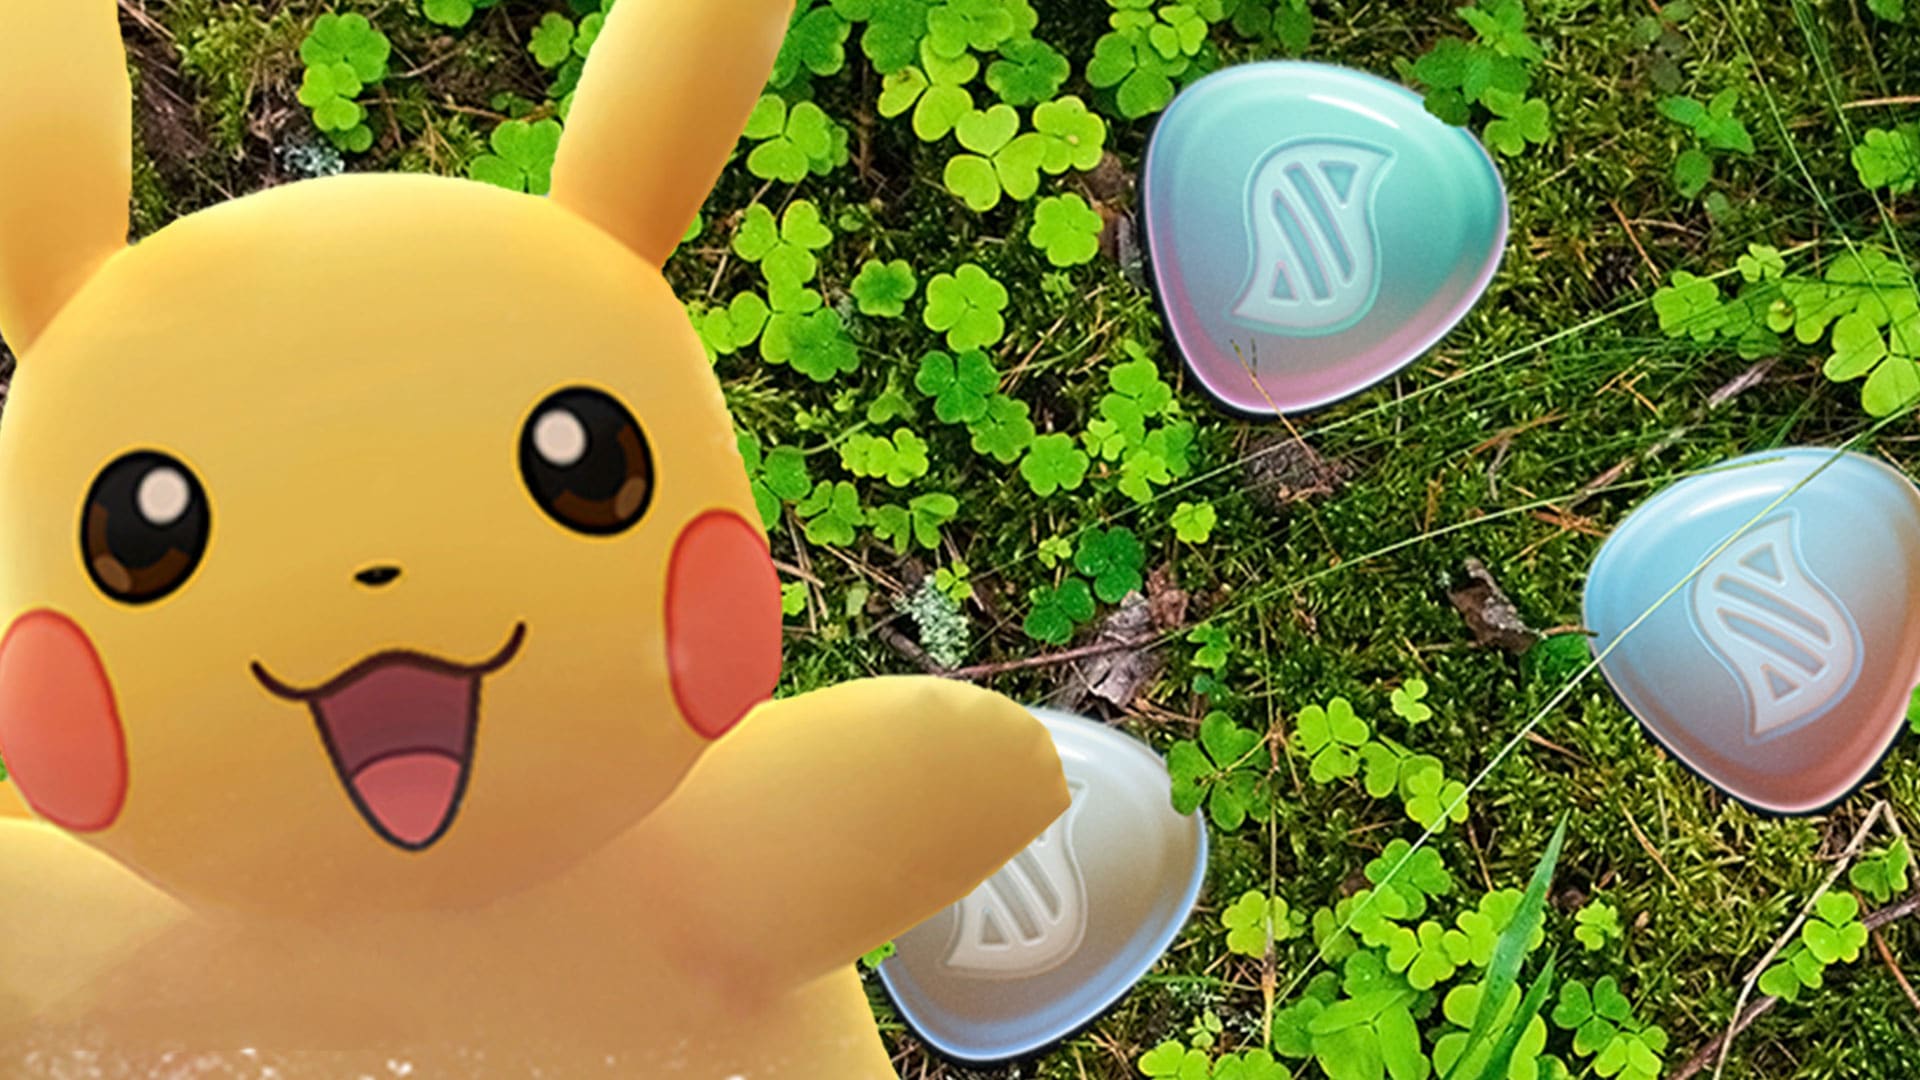 Pokémon GO brings big mega update - that's what the first testers say